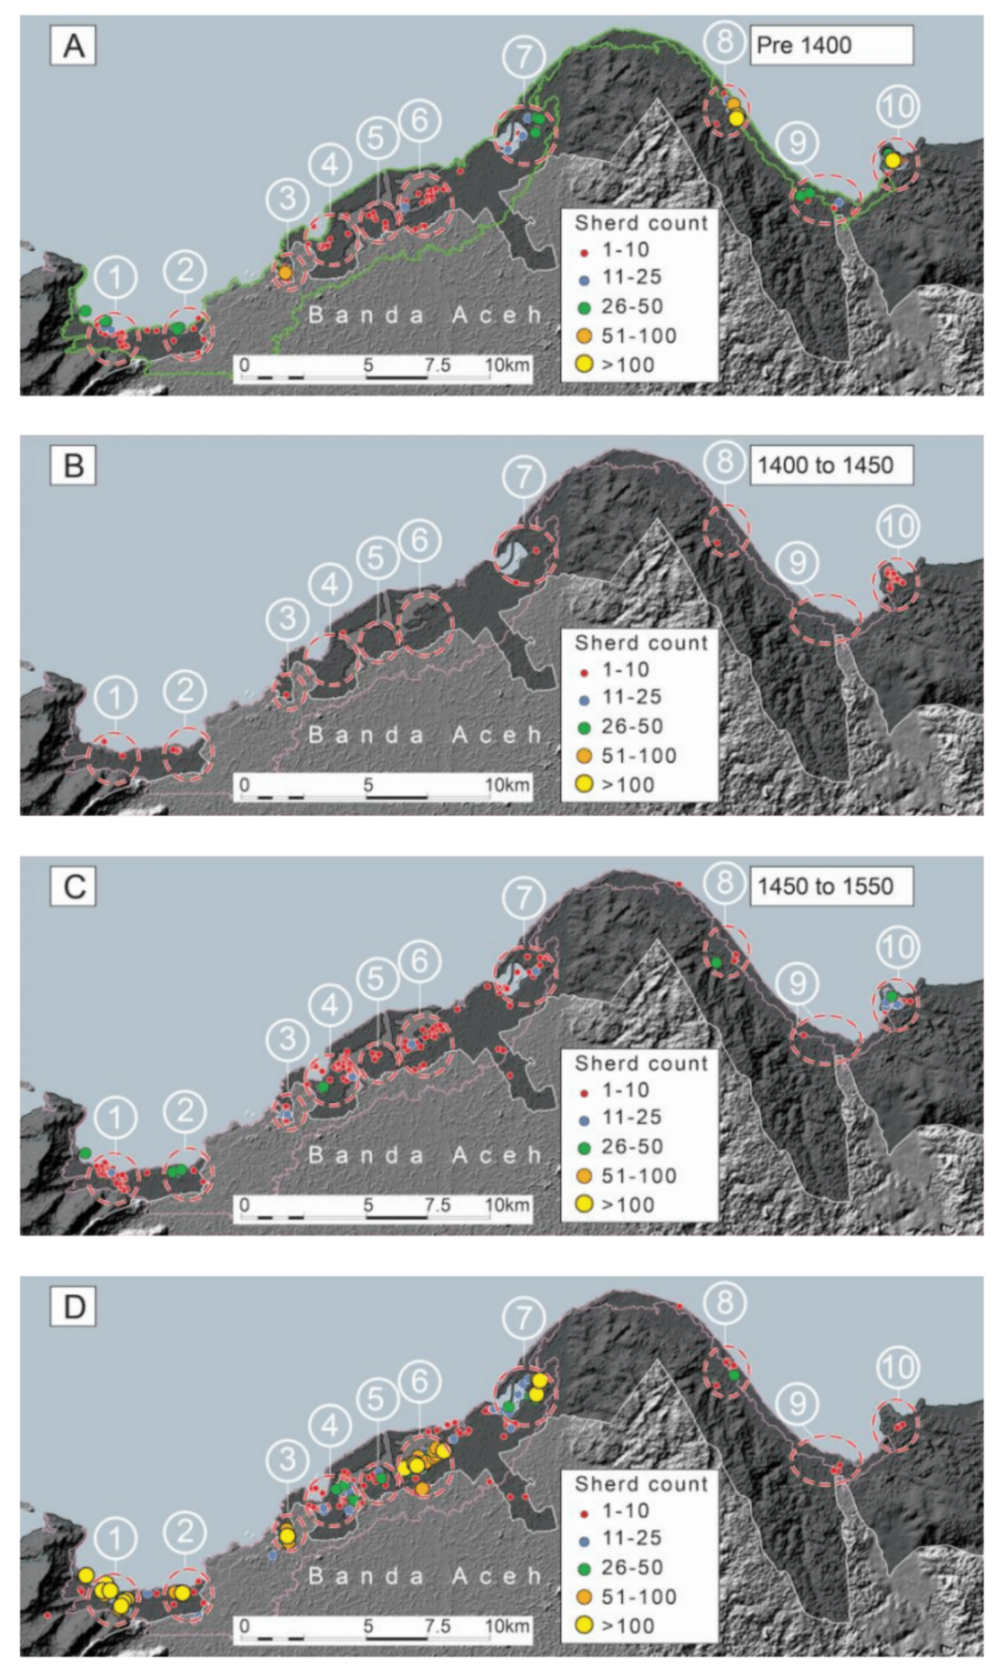 Maps of study area indicating distribution of dated ceramics showing the settlements and the changes in settlement patterns after the 1394 tsunami (Prepared by Y. Descatoire /Earth Observatory of Singapore, Published in Daly et al 2019 PNAS)